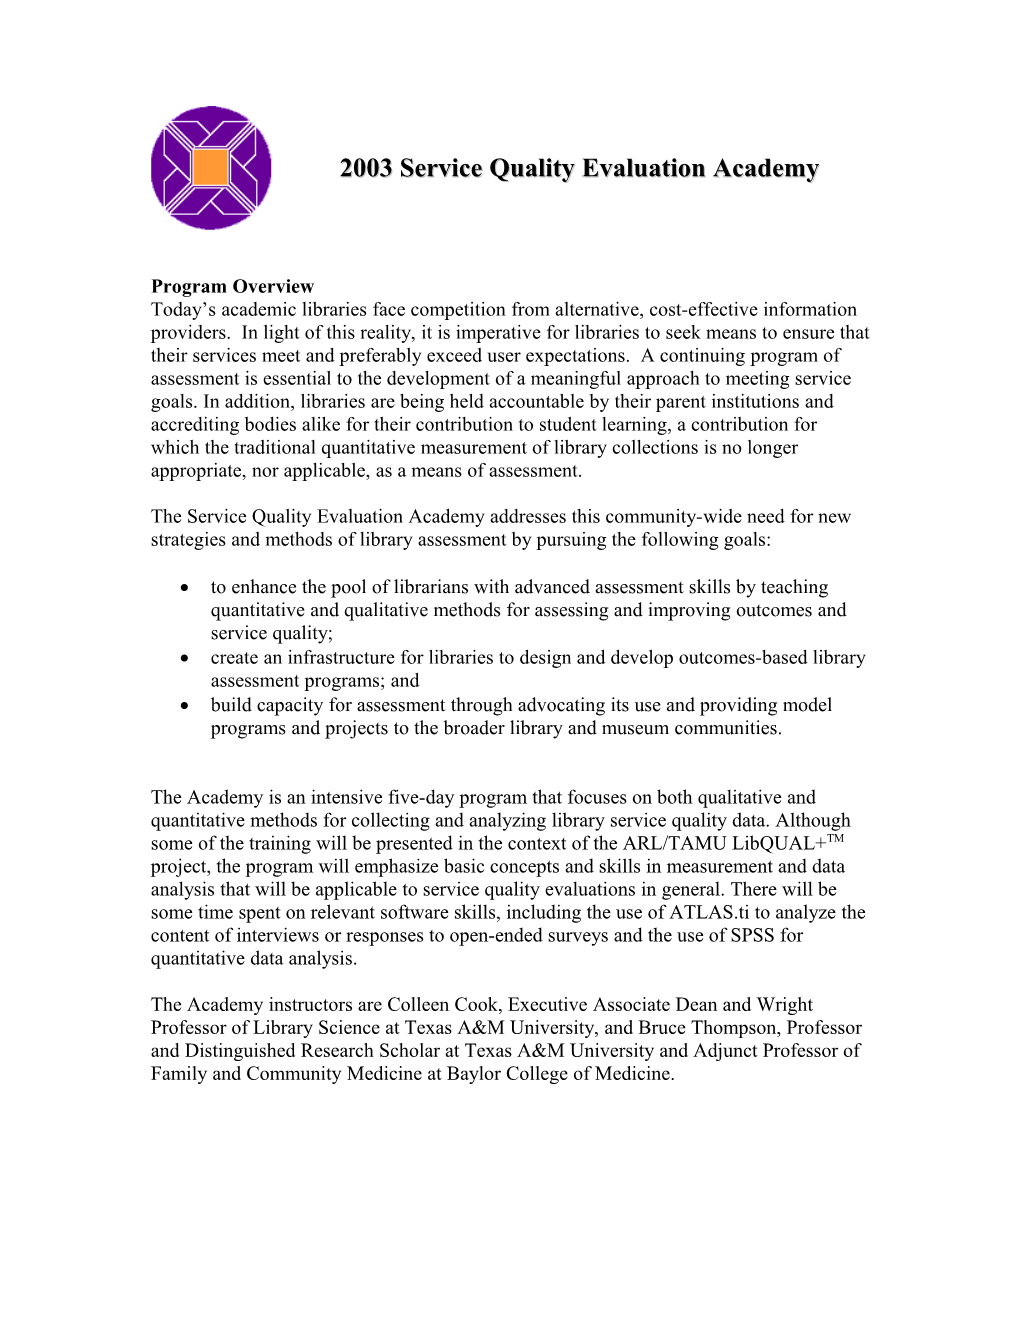 The Service Quality Evaluation Academy Is Designed for Librarians Across Library Types